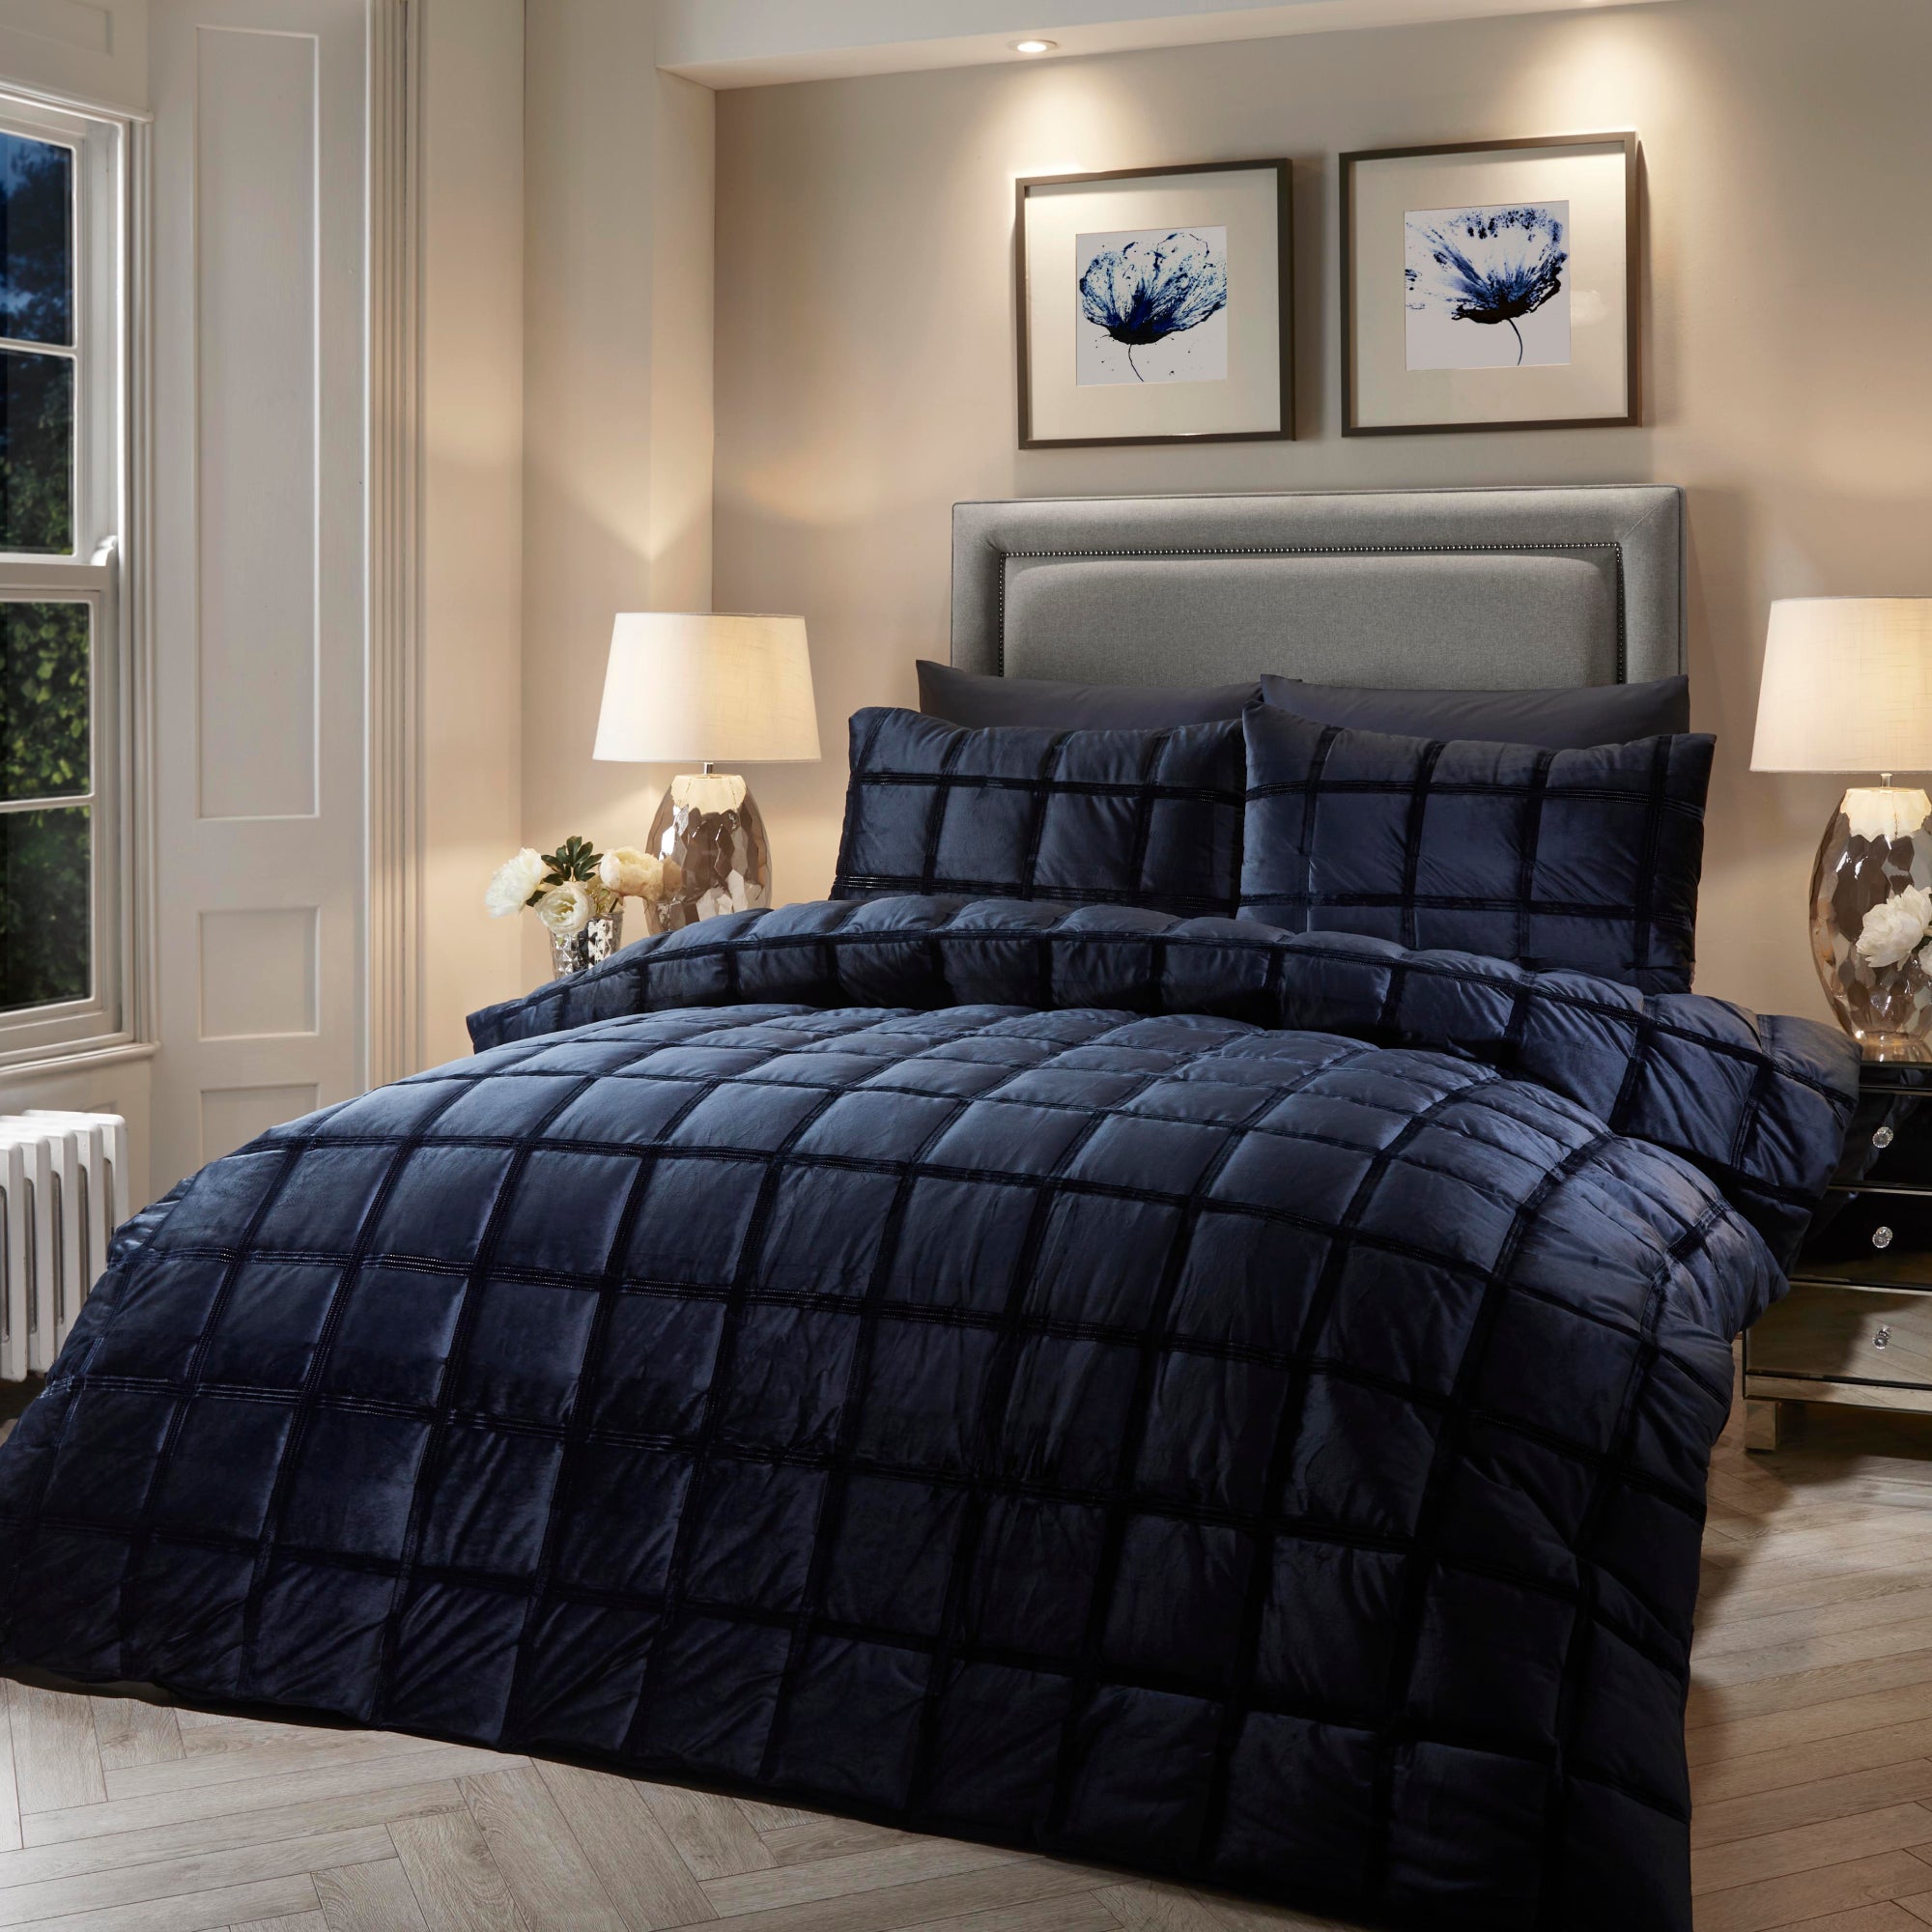 Duvet Cover Set Brighton Square by Soiree in Navy